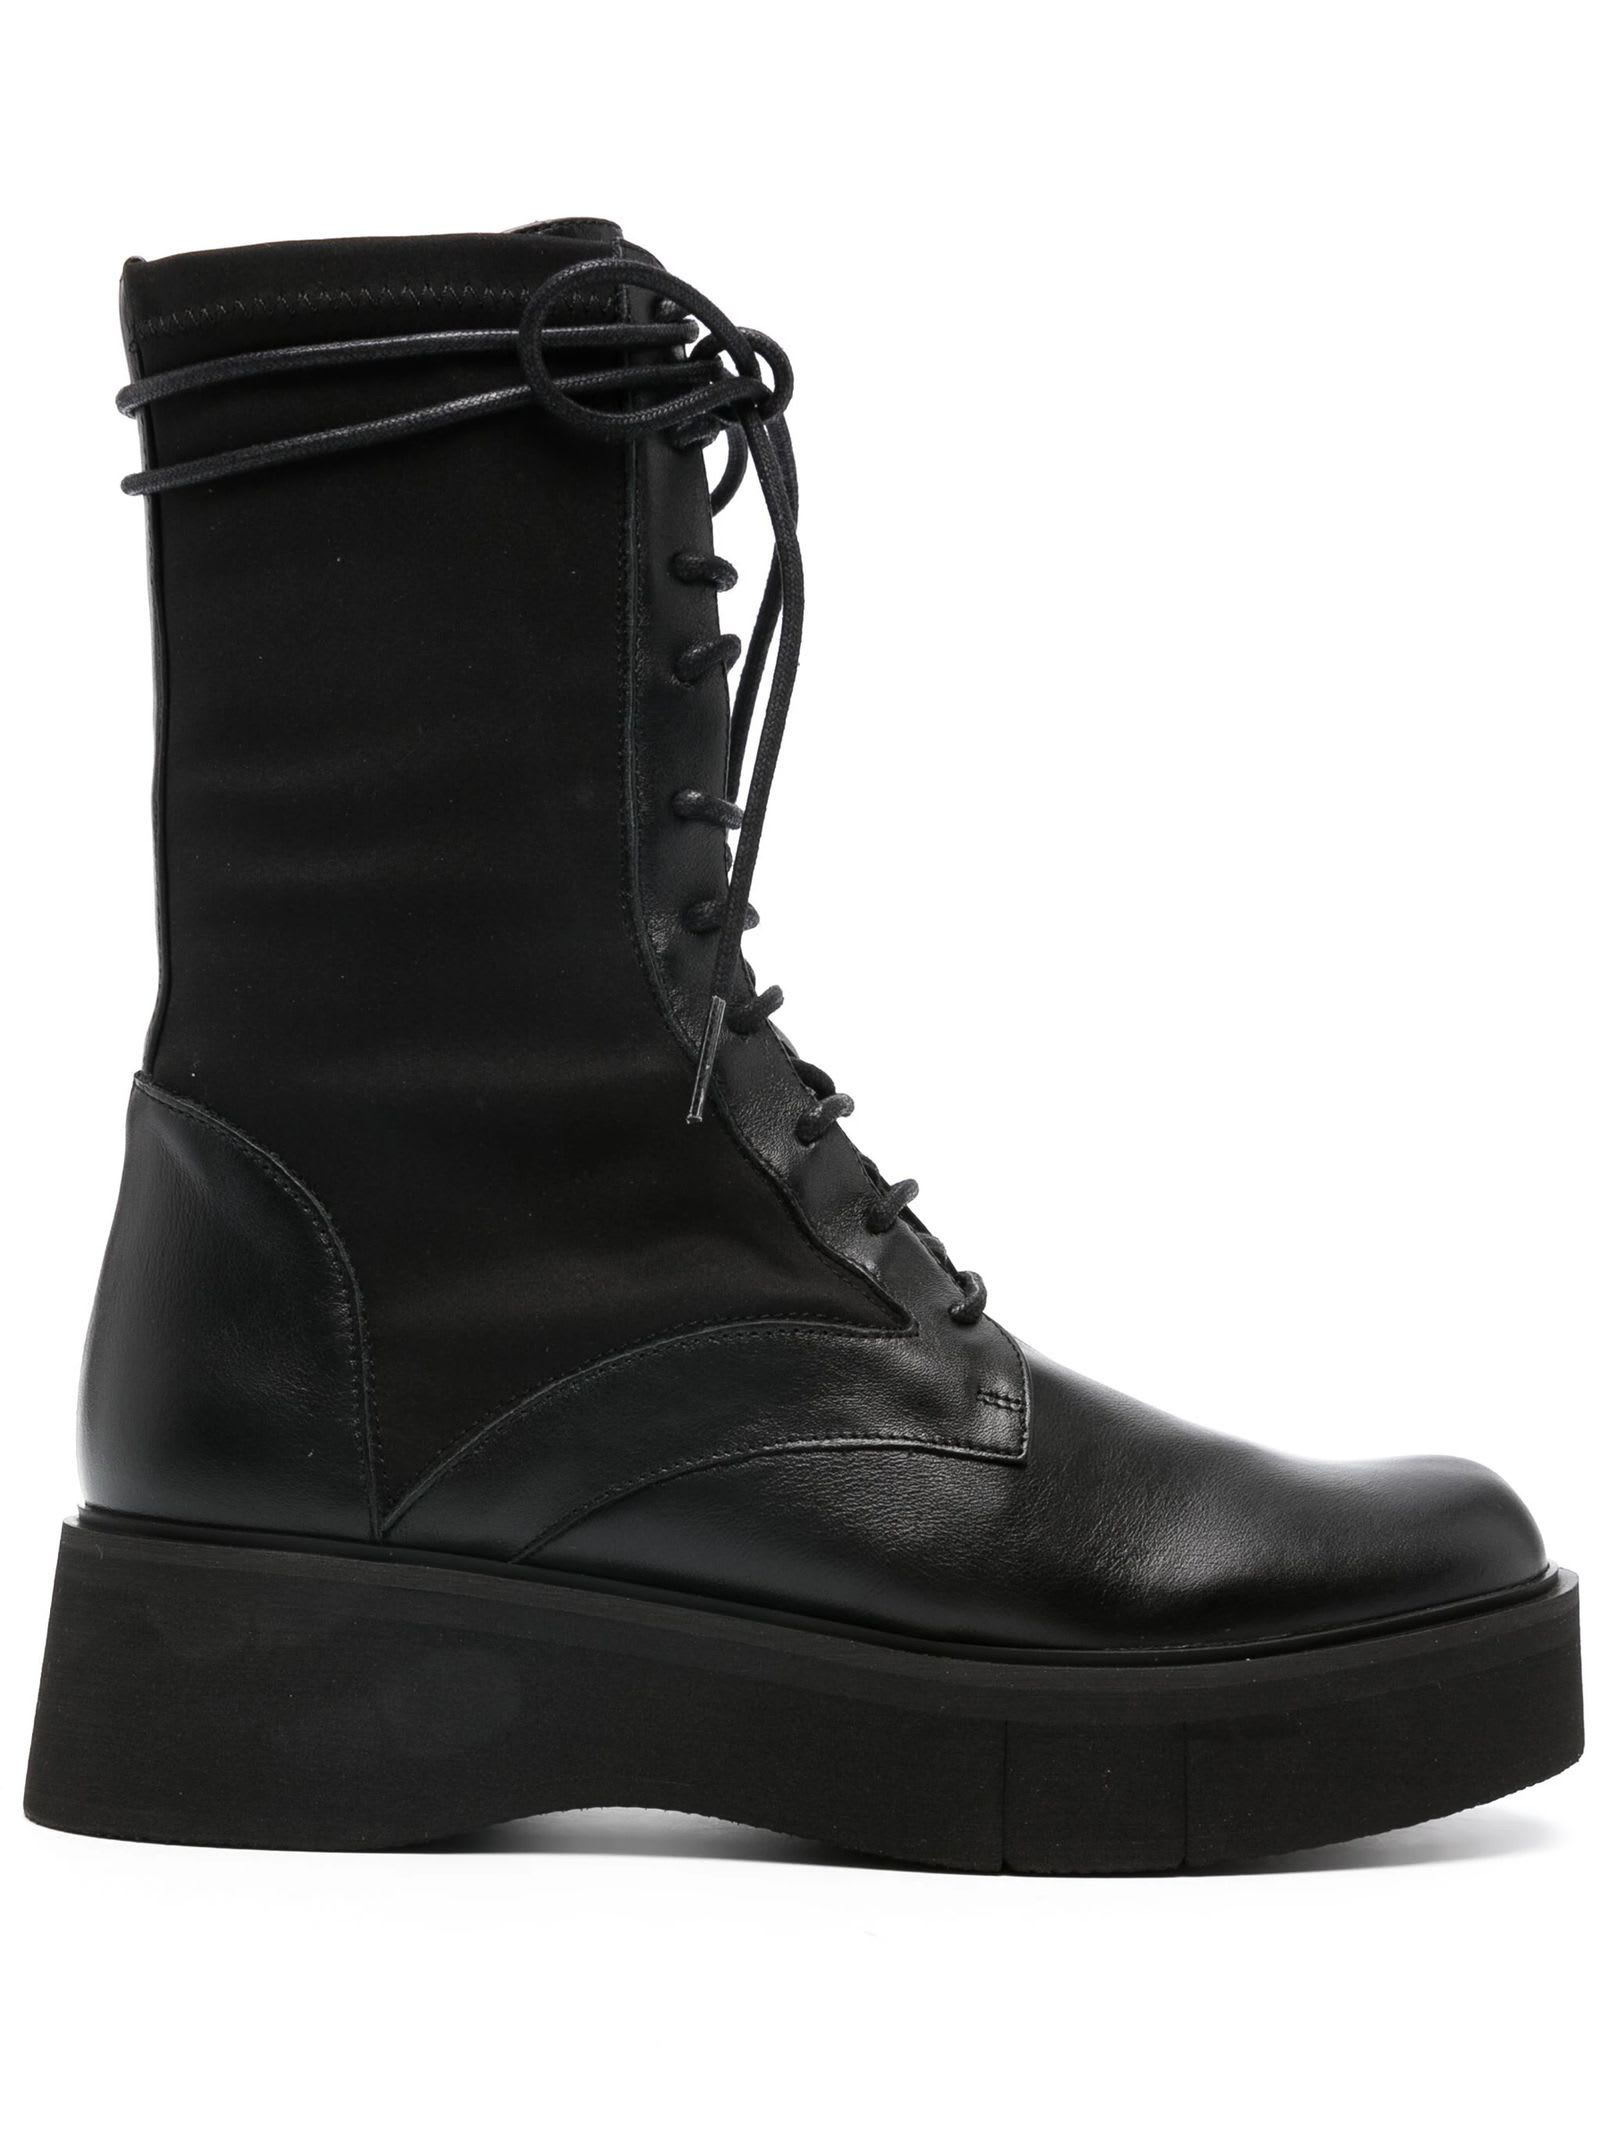 PALOMA BARCELÓ BLACK JADE LEATHER ANKLE BOOTS